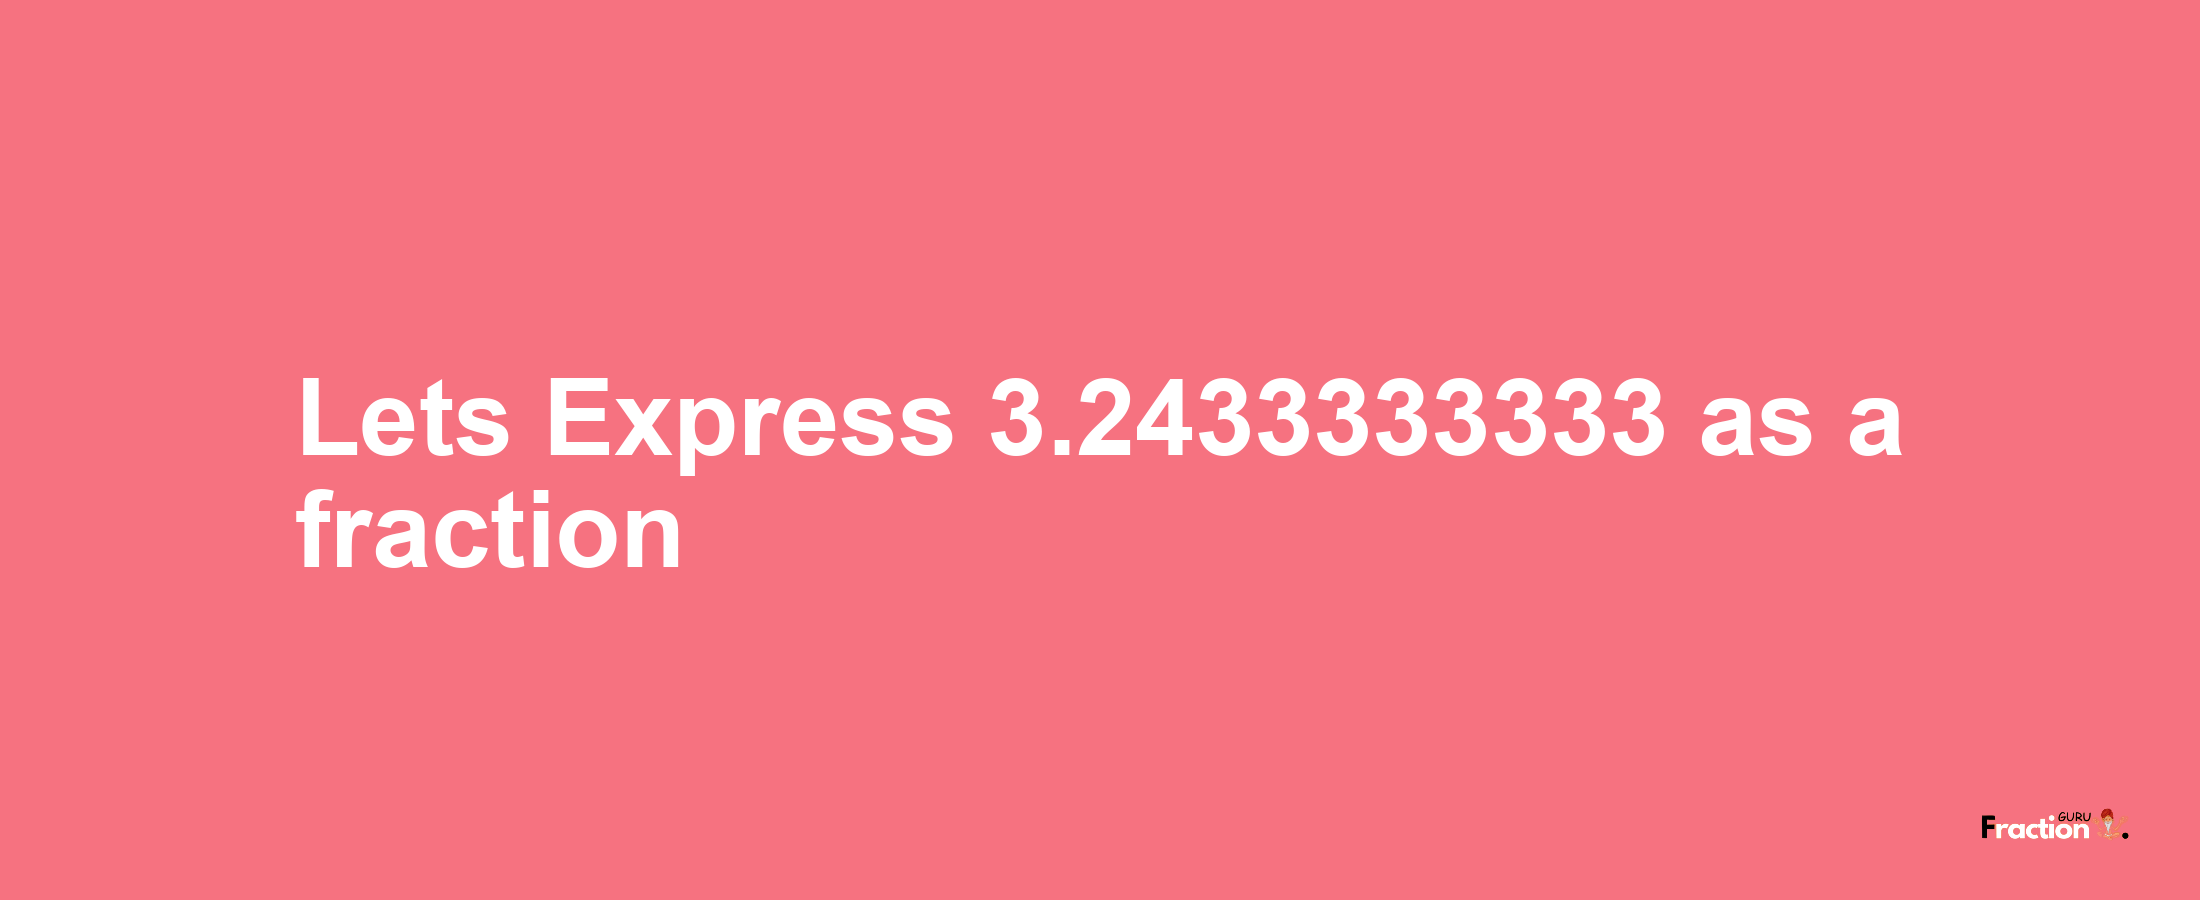 Lets Express 3.2433333333 as afraction